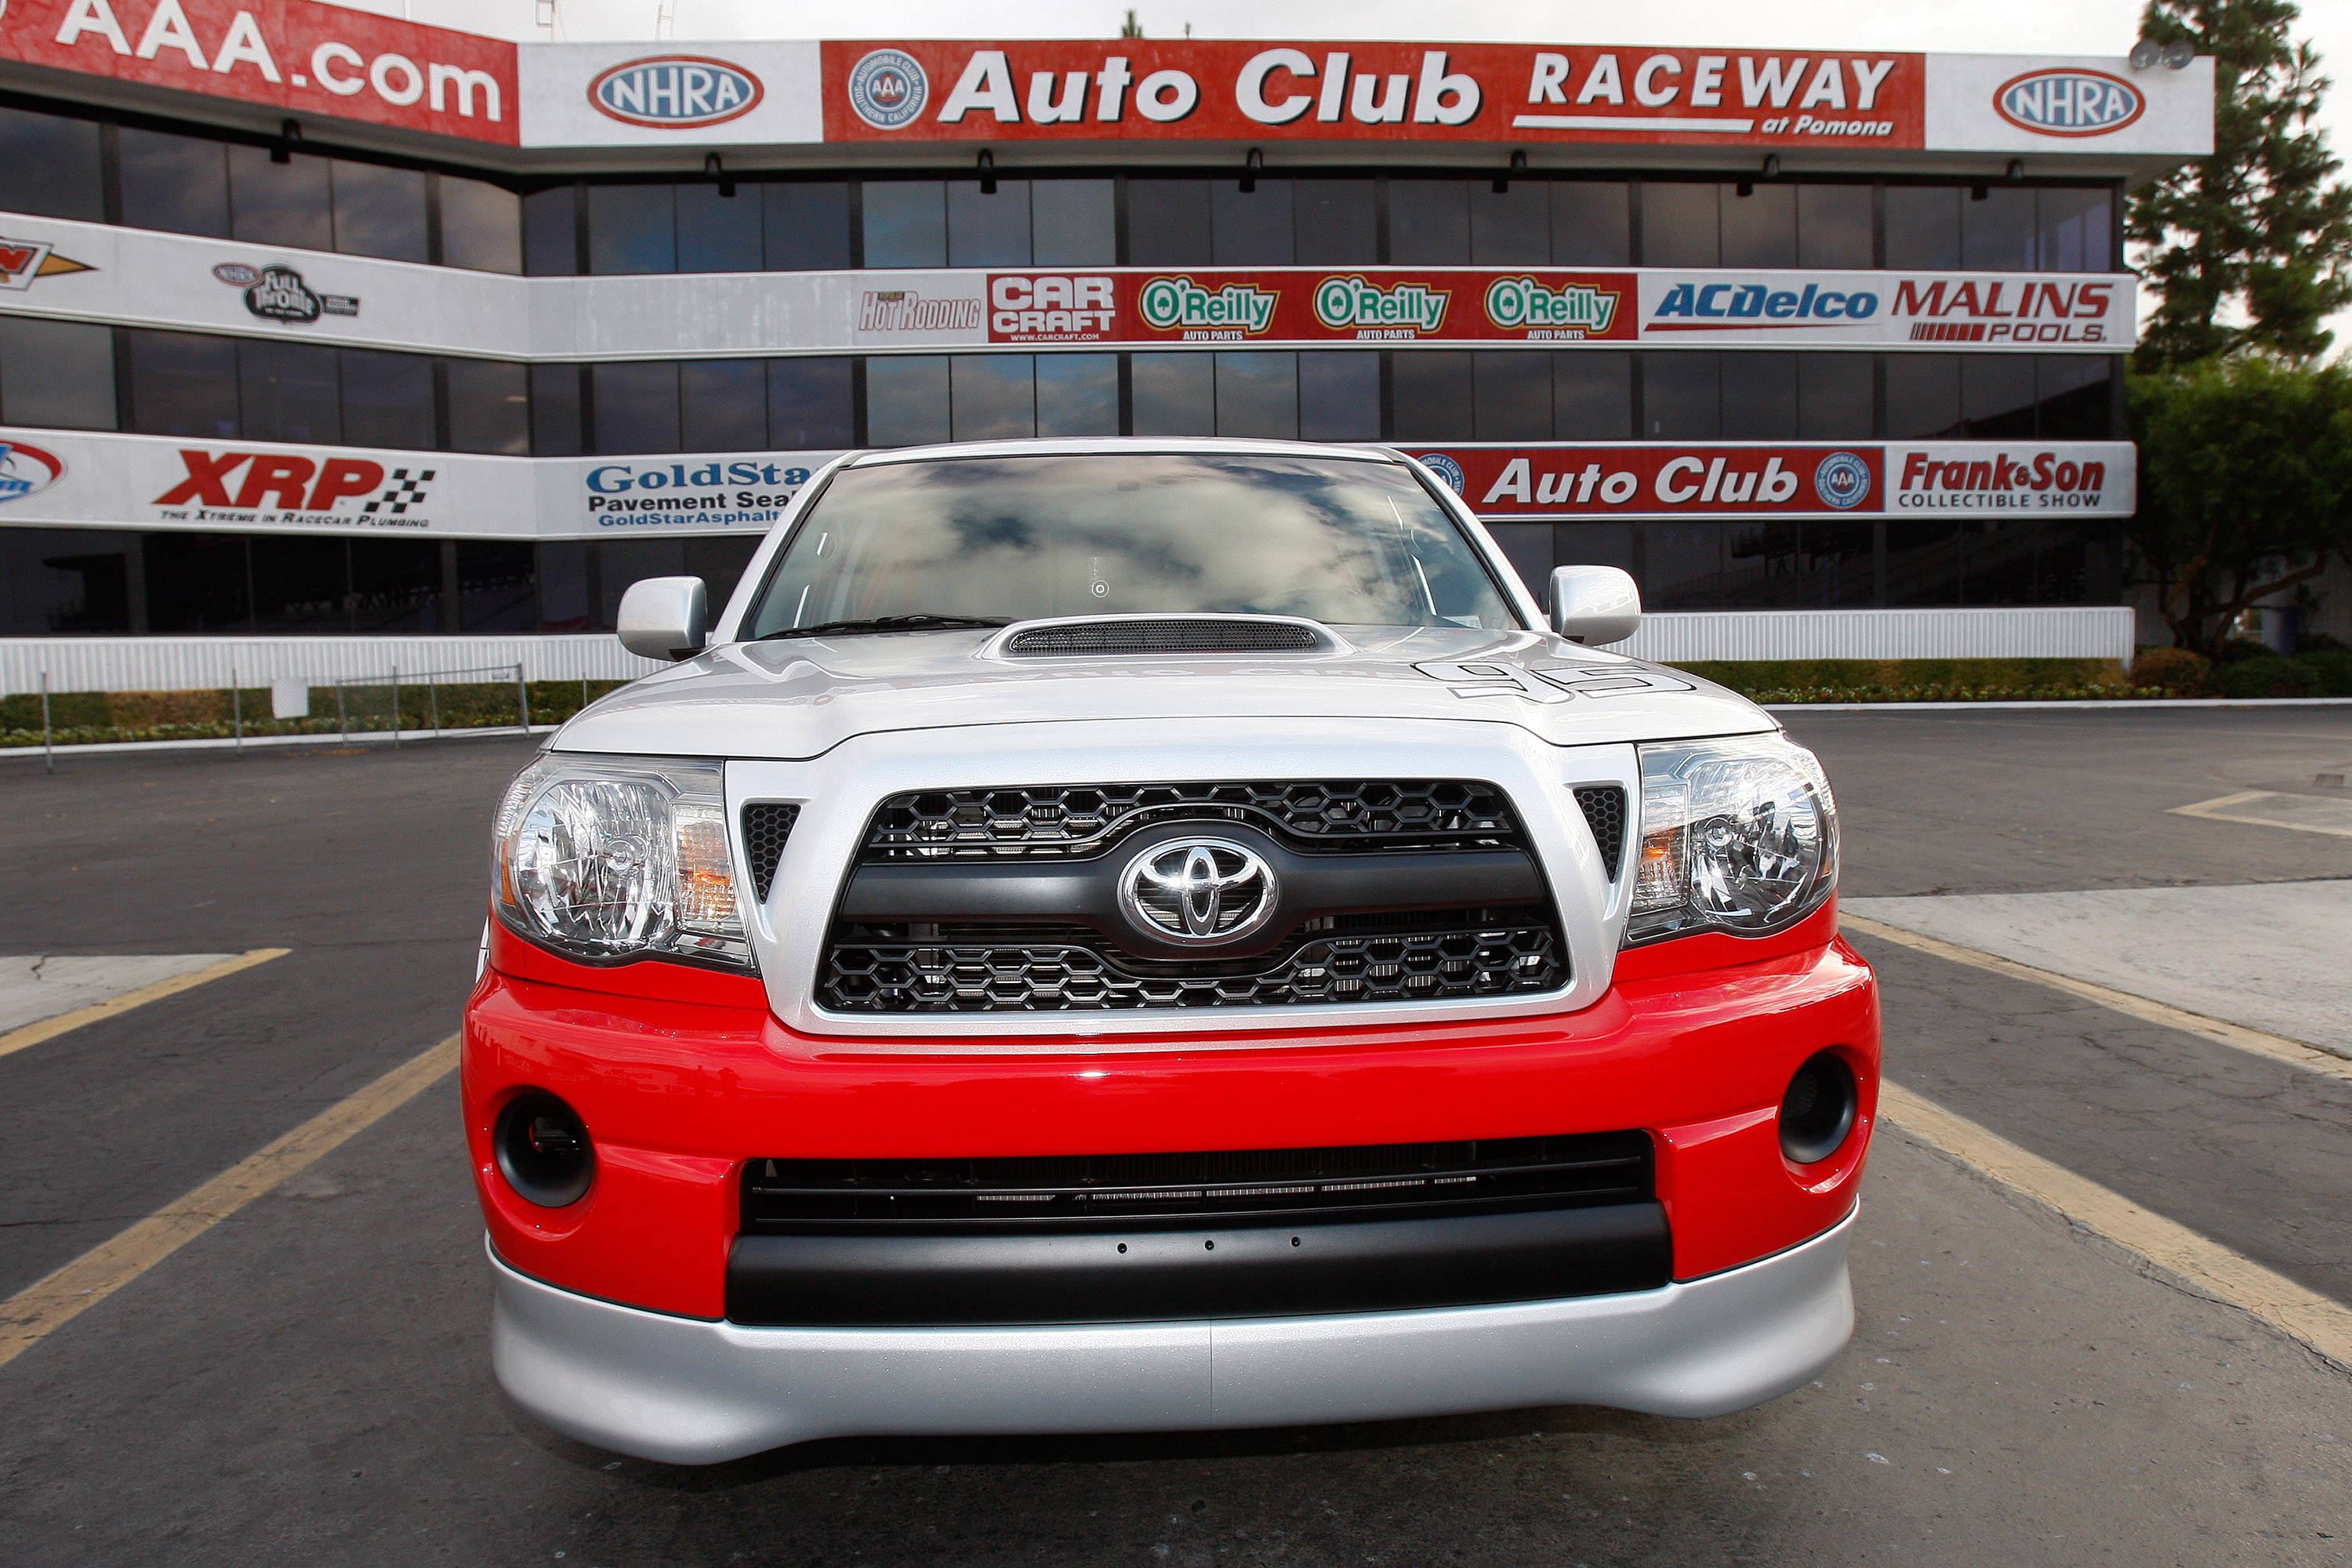 Toyota Tacoma X-Runner RTR (Ready to Race)